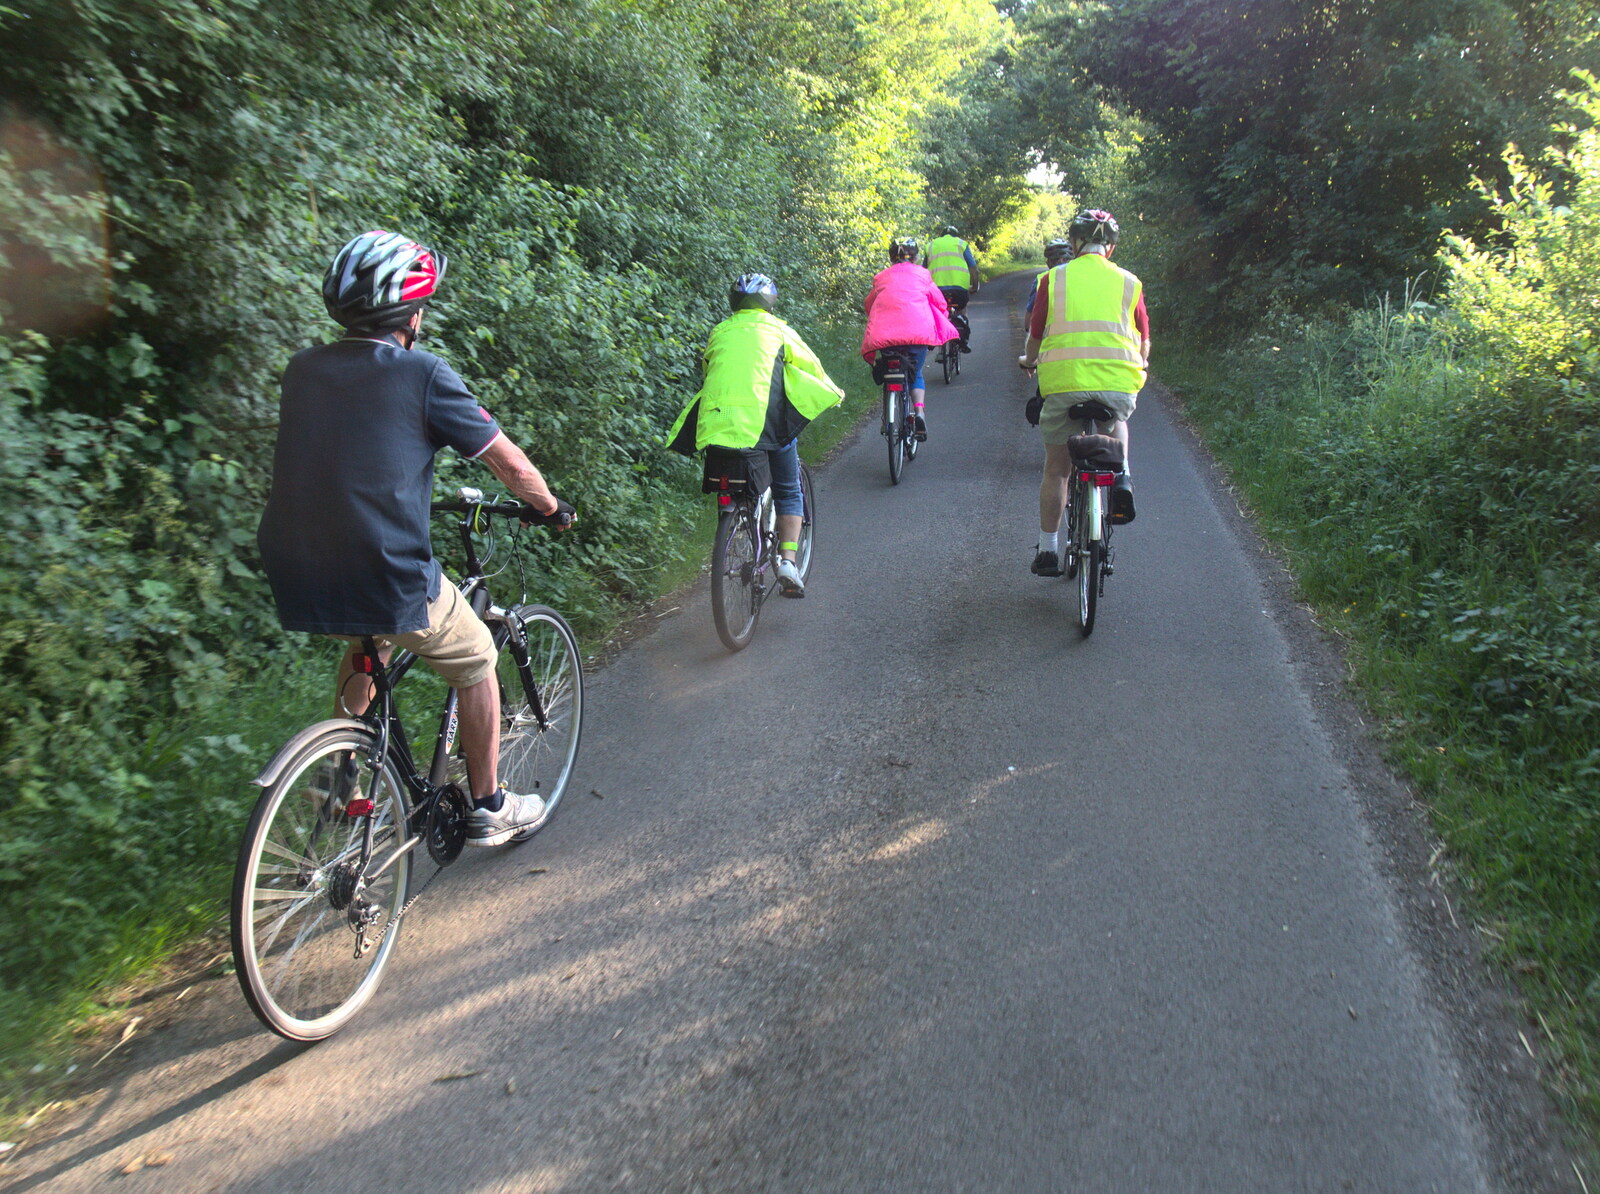 The BSCC heads off towards Thrandeston from The BSCC Rides to the Six Bells, Gislingham, Suffolk - 1st June 2017